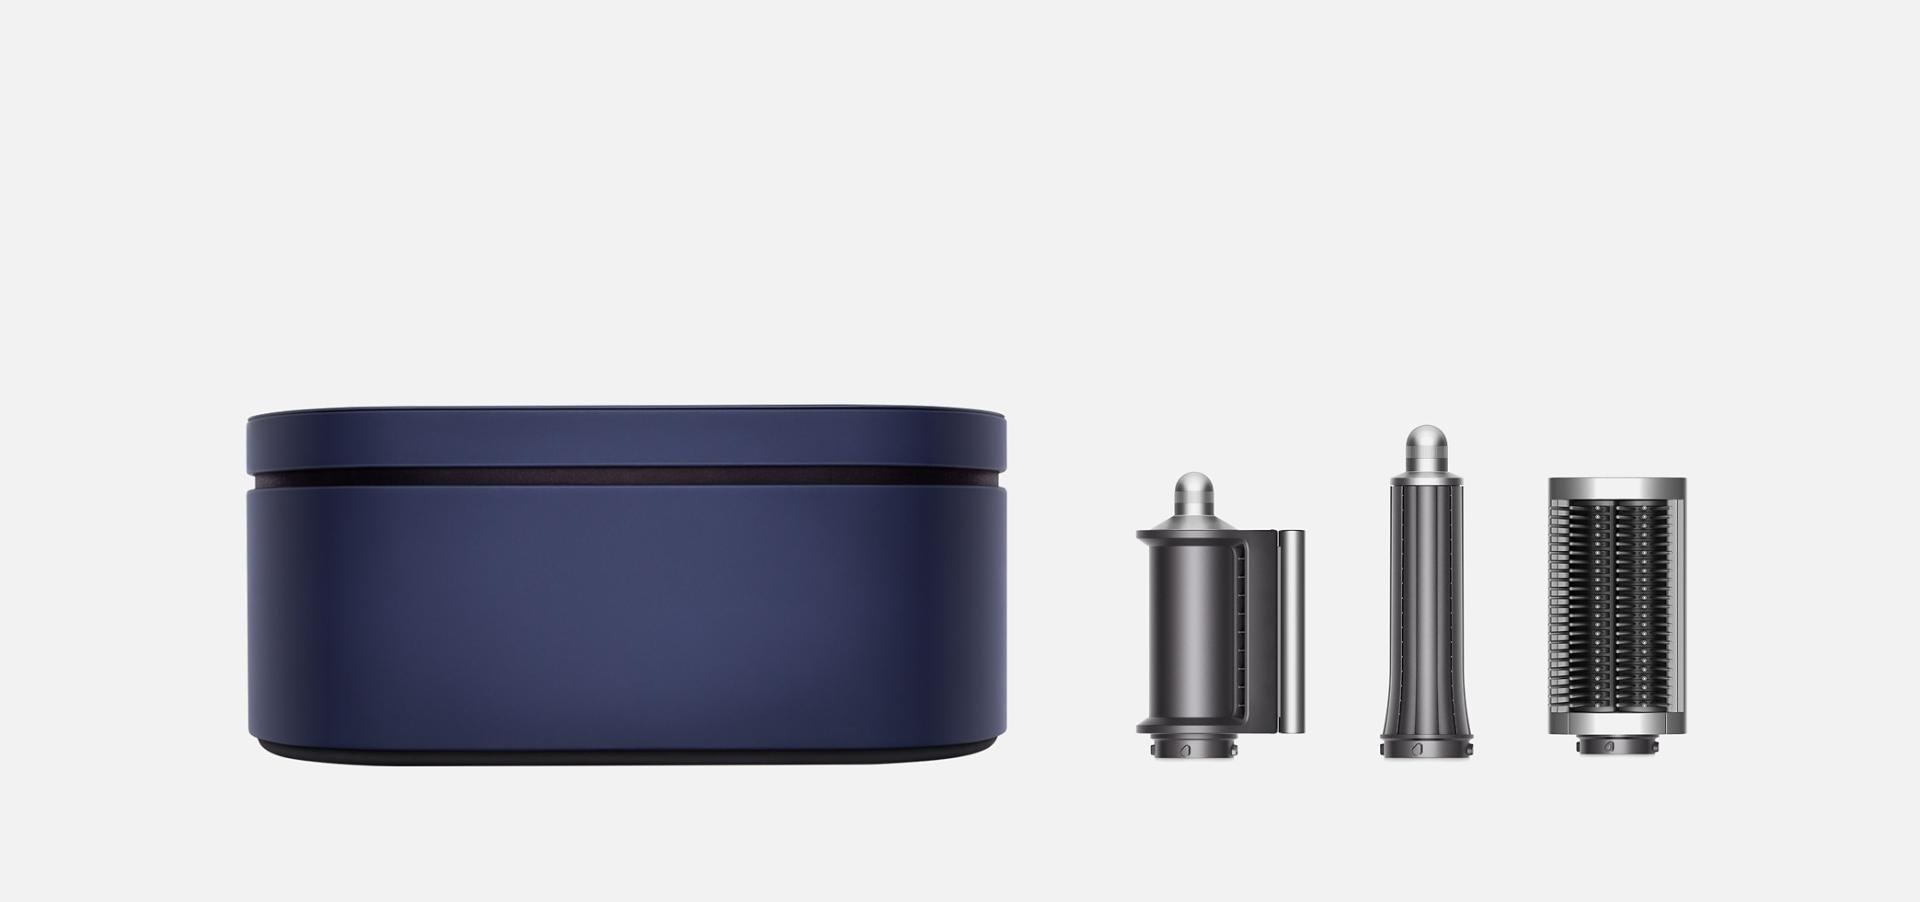 Dyson presentation case in Prussian blue with three re-engineered attachments